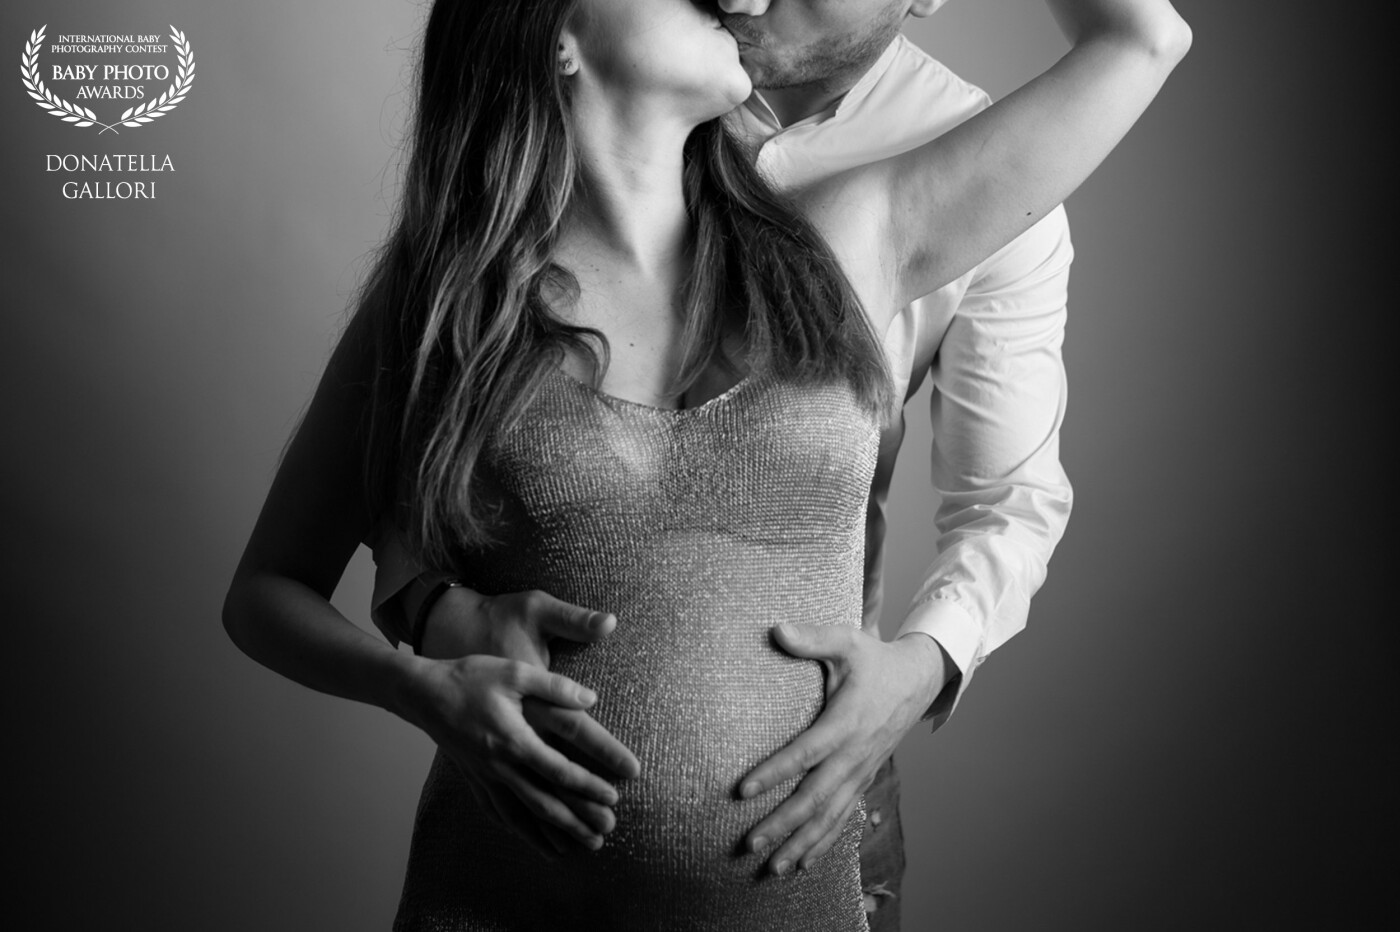 Ylenia and Stefano,  definitely in love with their baby boy ❤️.  They relied completely on my creativity and managed to create a fantastic pregnancy photoshoot.